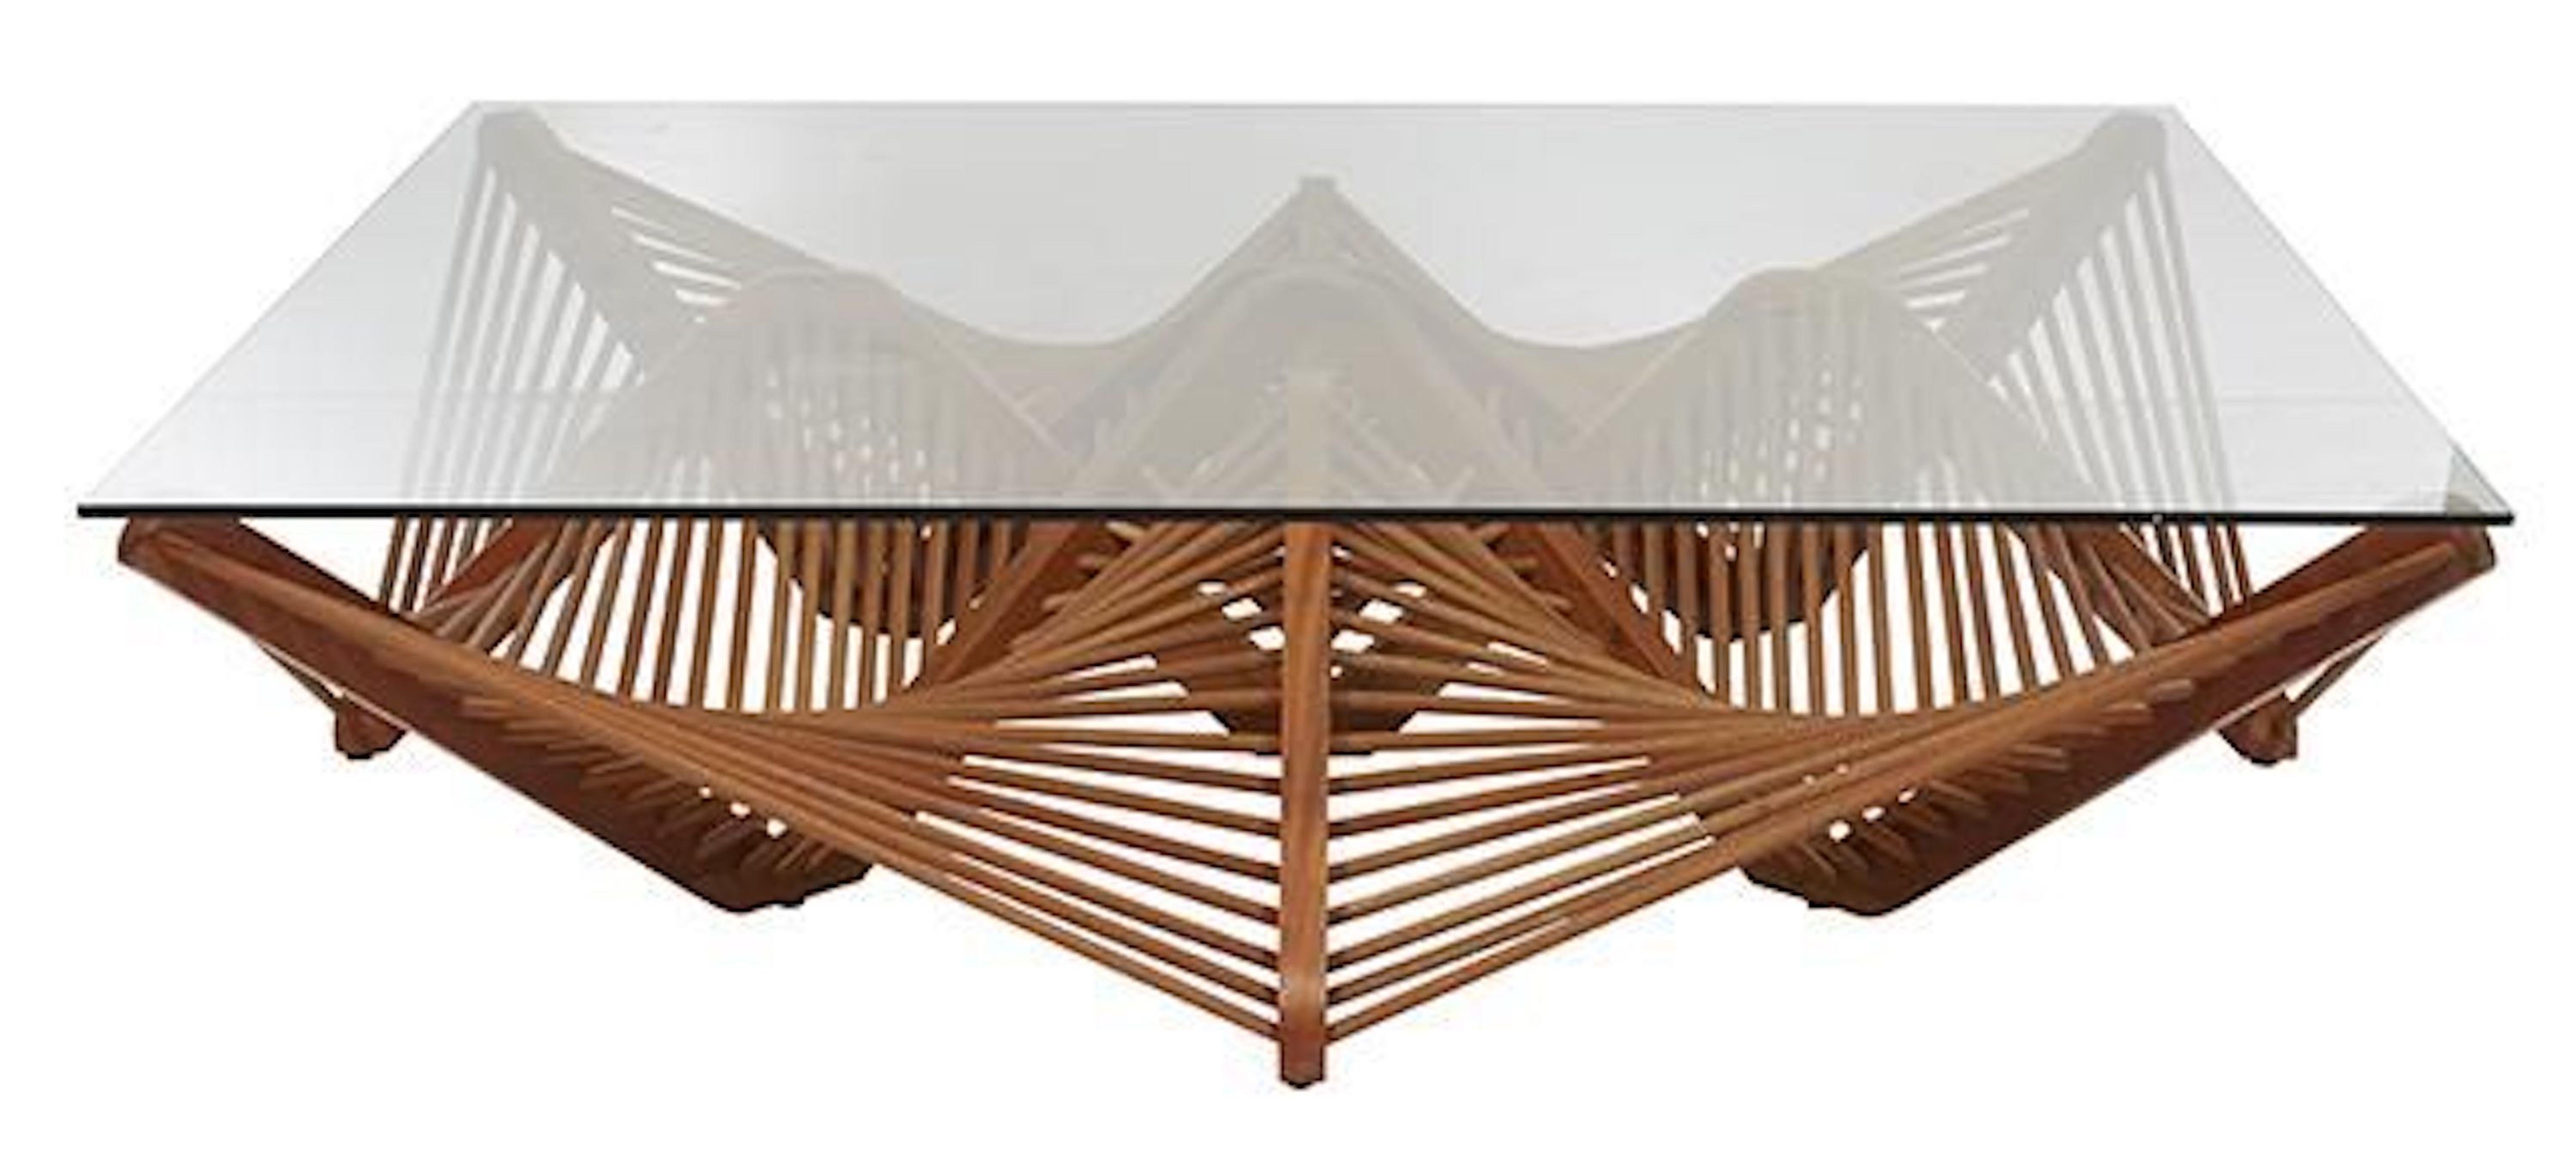 This innovative design, conceived by Vito Selma, showcases a captivating arrangement of geometric shapes crafted with lauan wood. The bold web of interconnected shapes adds an element of intrigue to the overall design. With its unique construction,